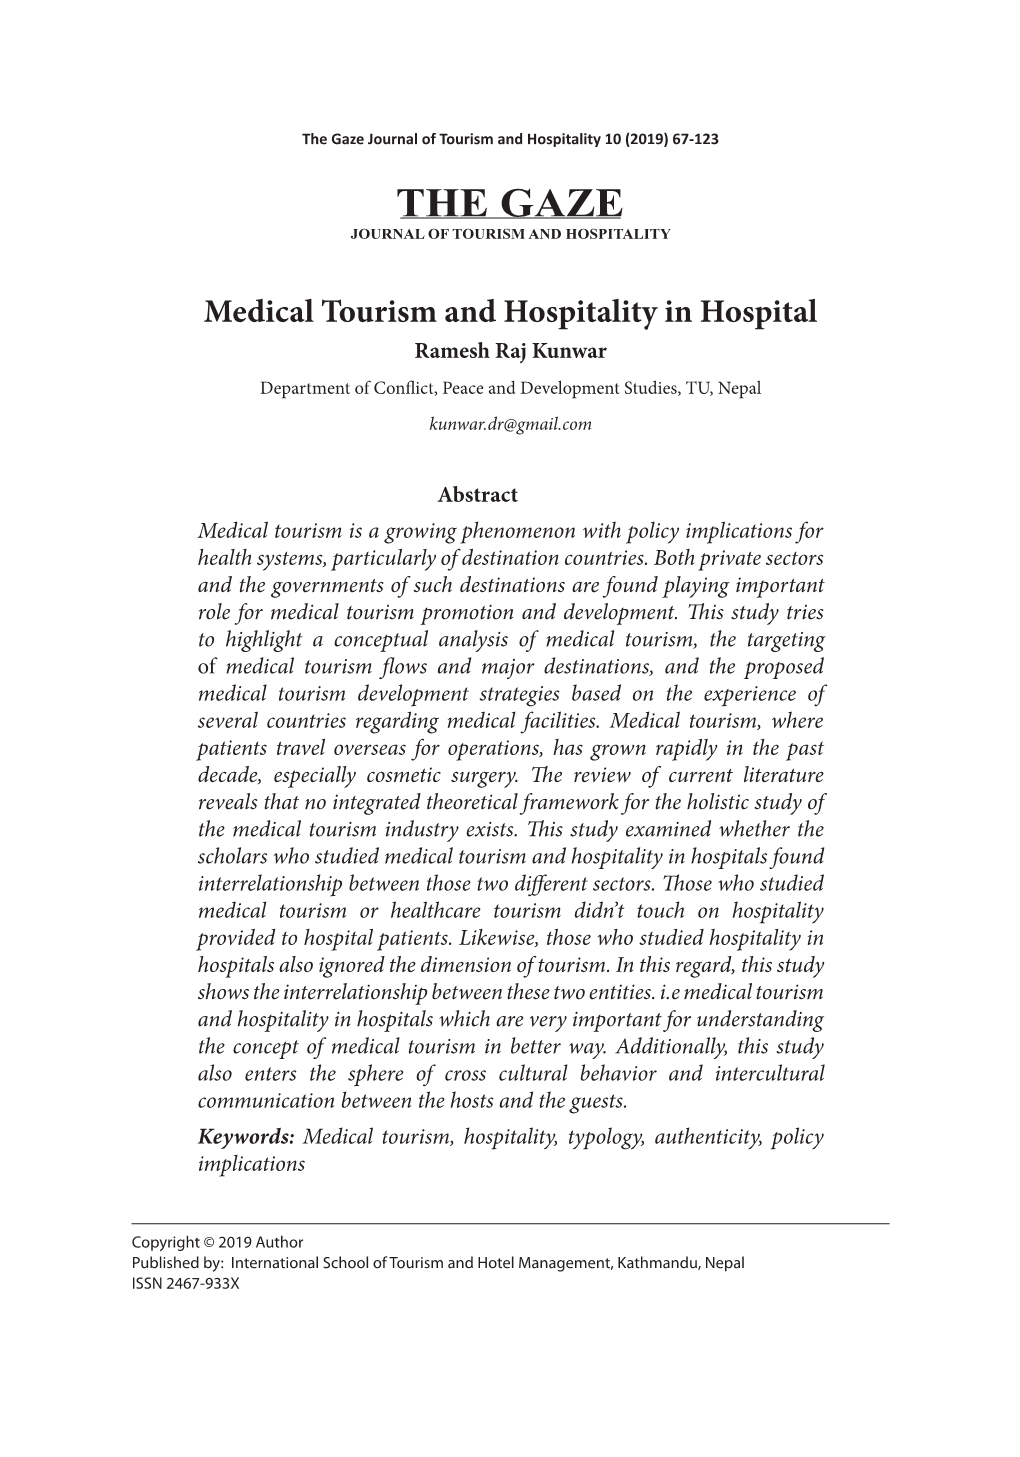 The Gaze Journal of Tourism and Hospitality 10 (2019) 67-123 the GAZE JOURNAL of TOURISM and HOSPITALITY